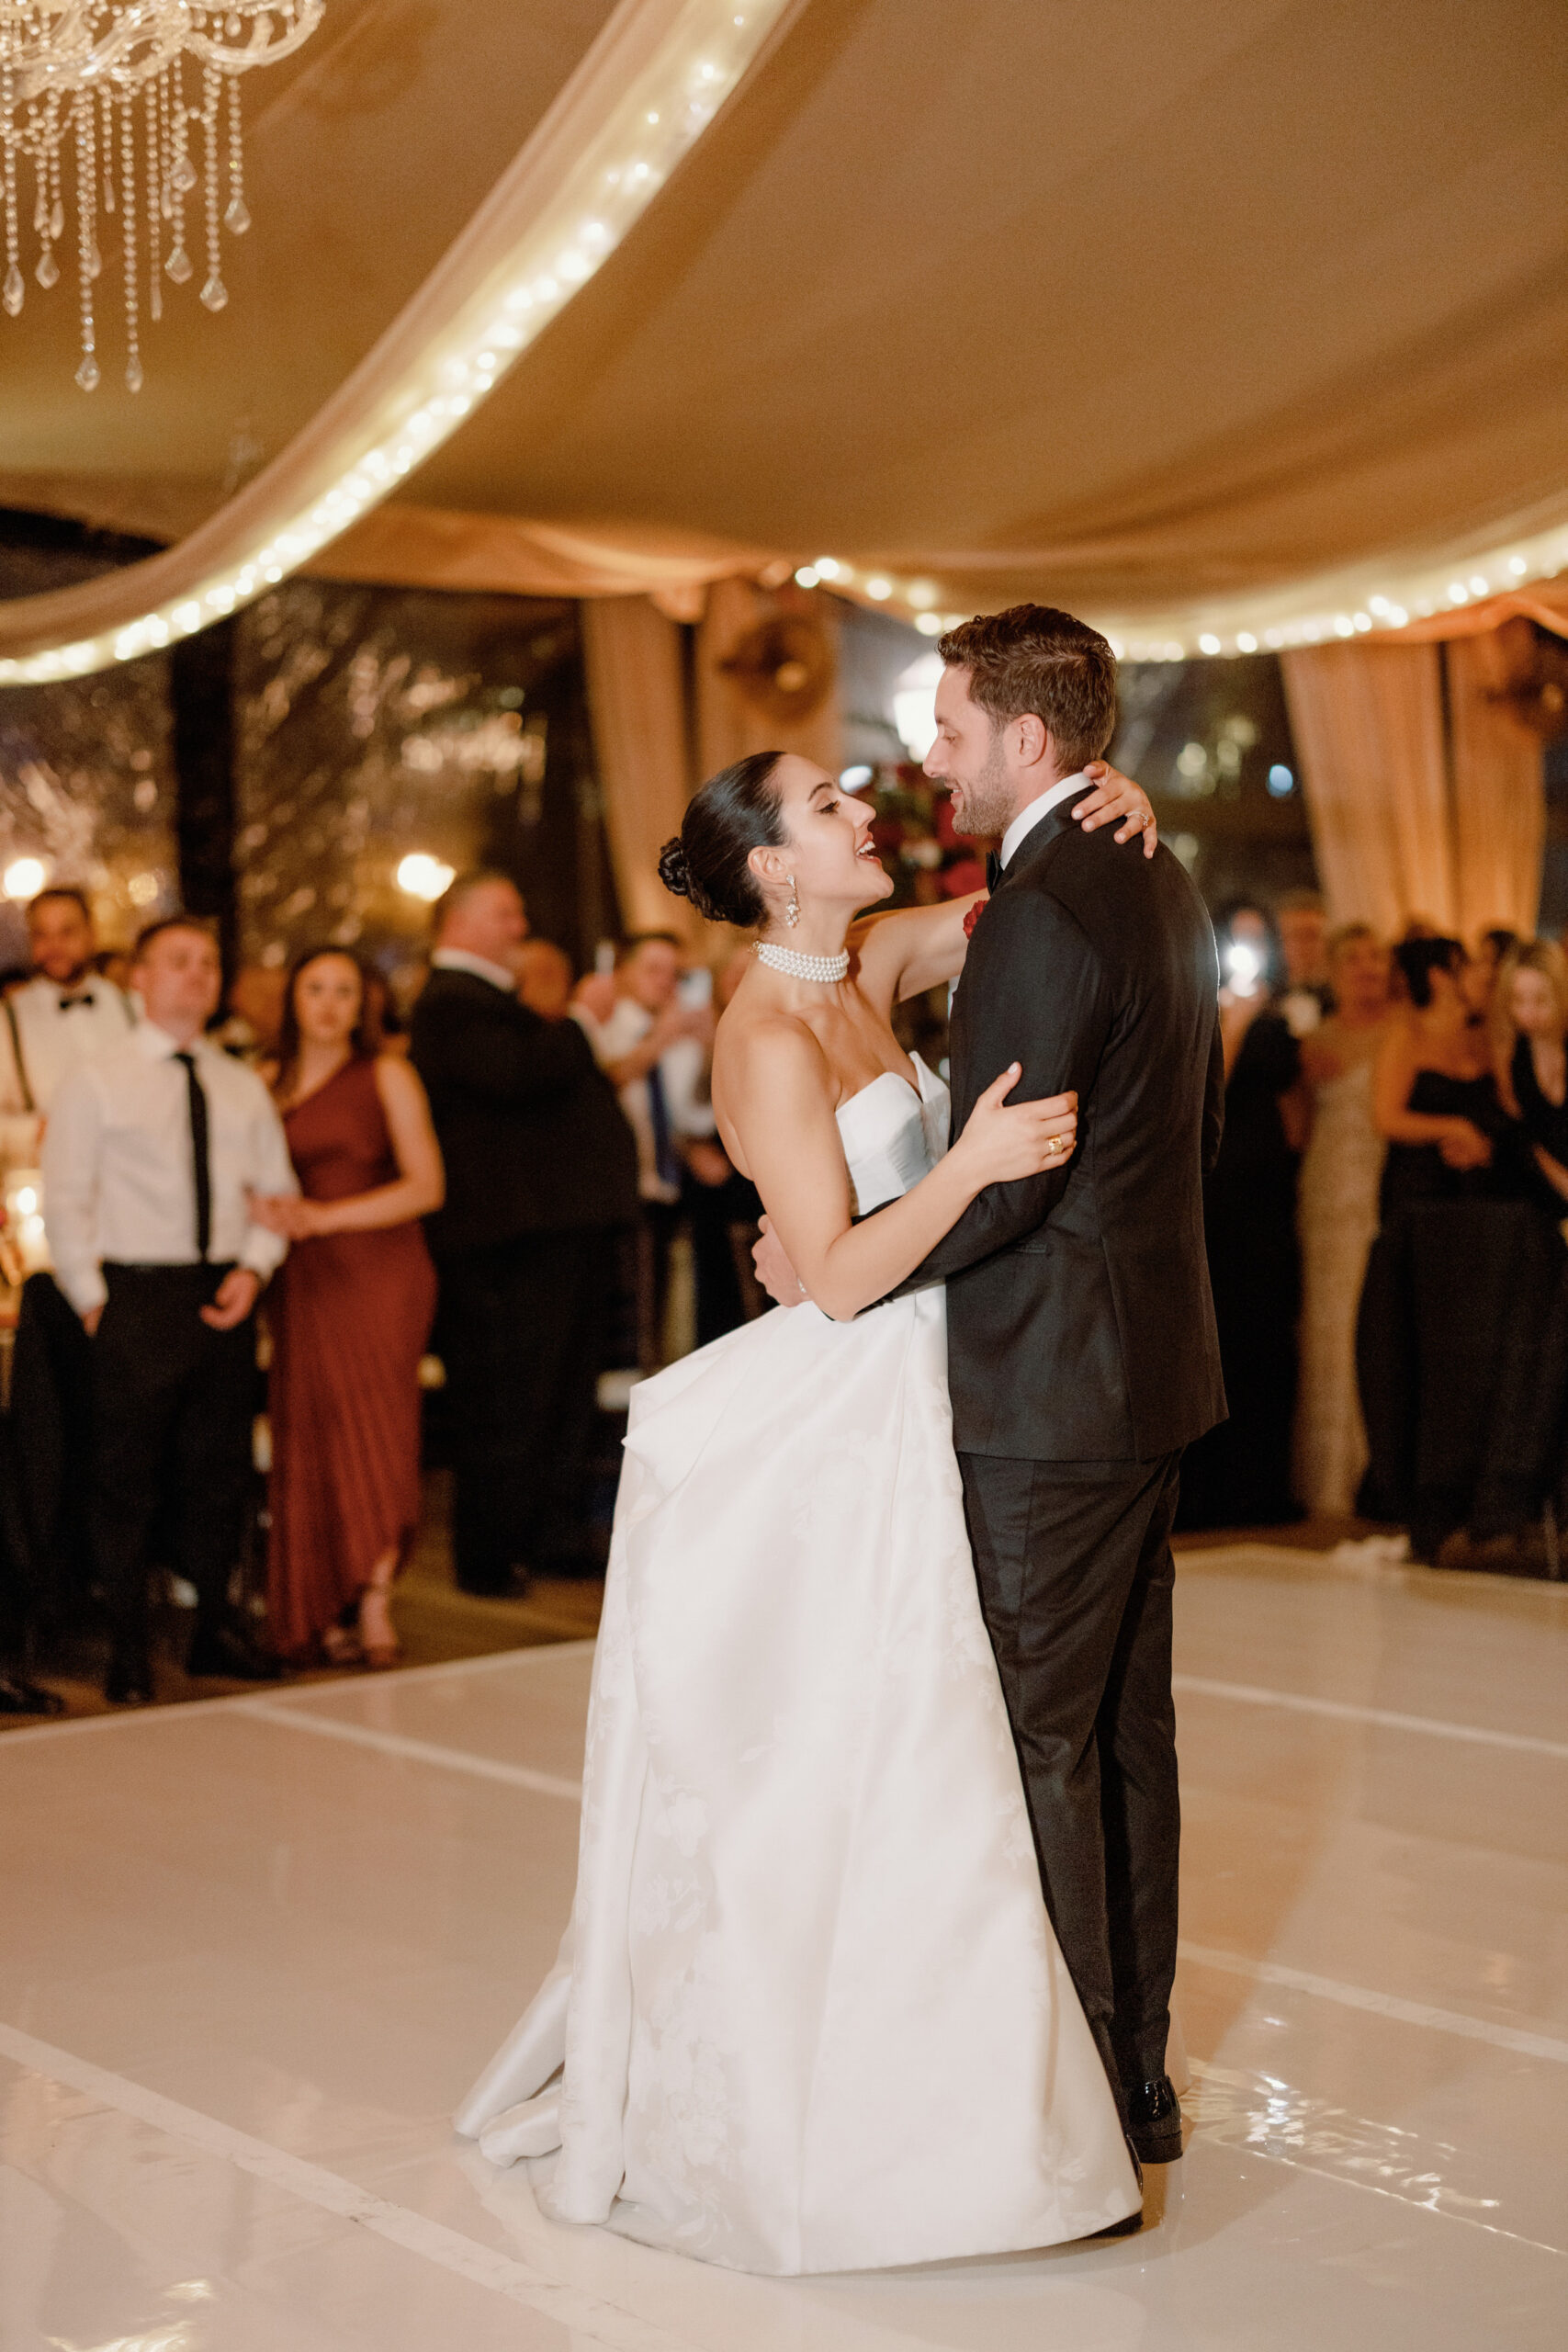 First dance photo of the Newlyweds. wedding traditions Image by Jenny Fu Studio NYC